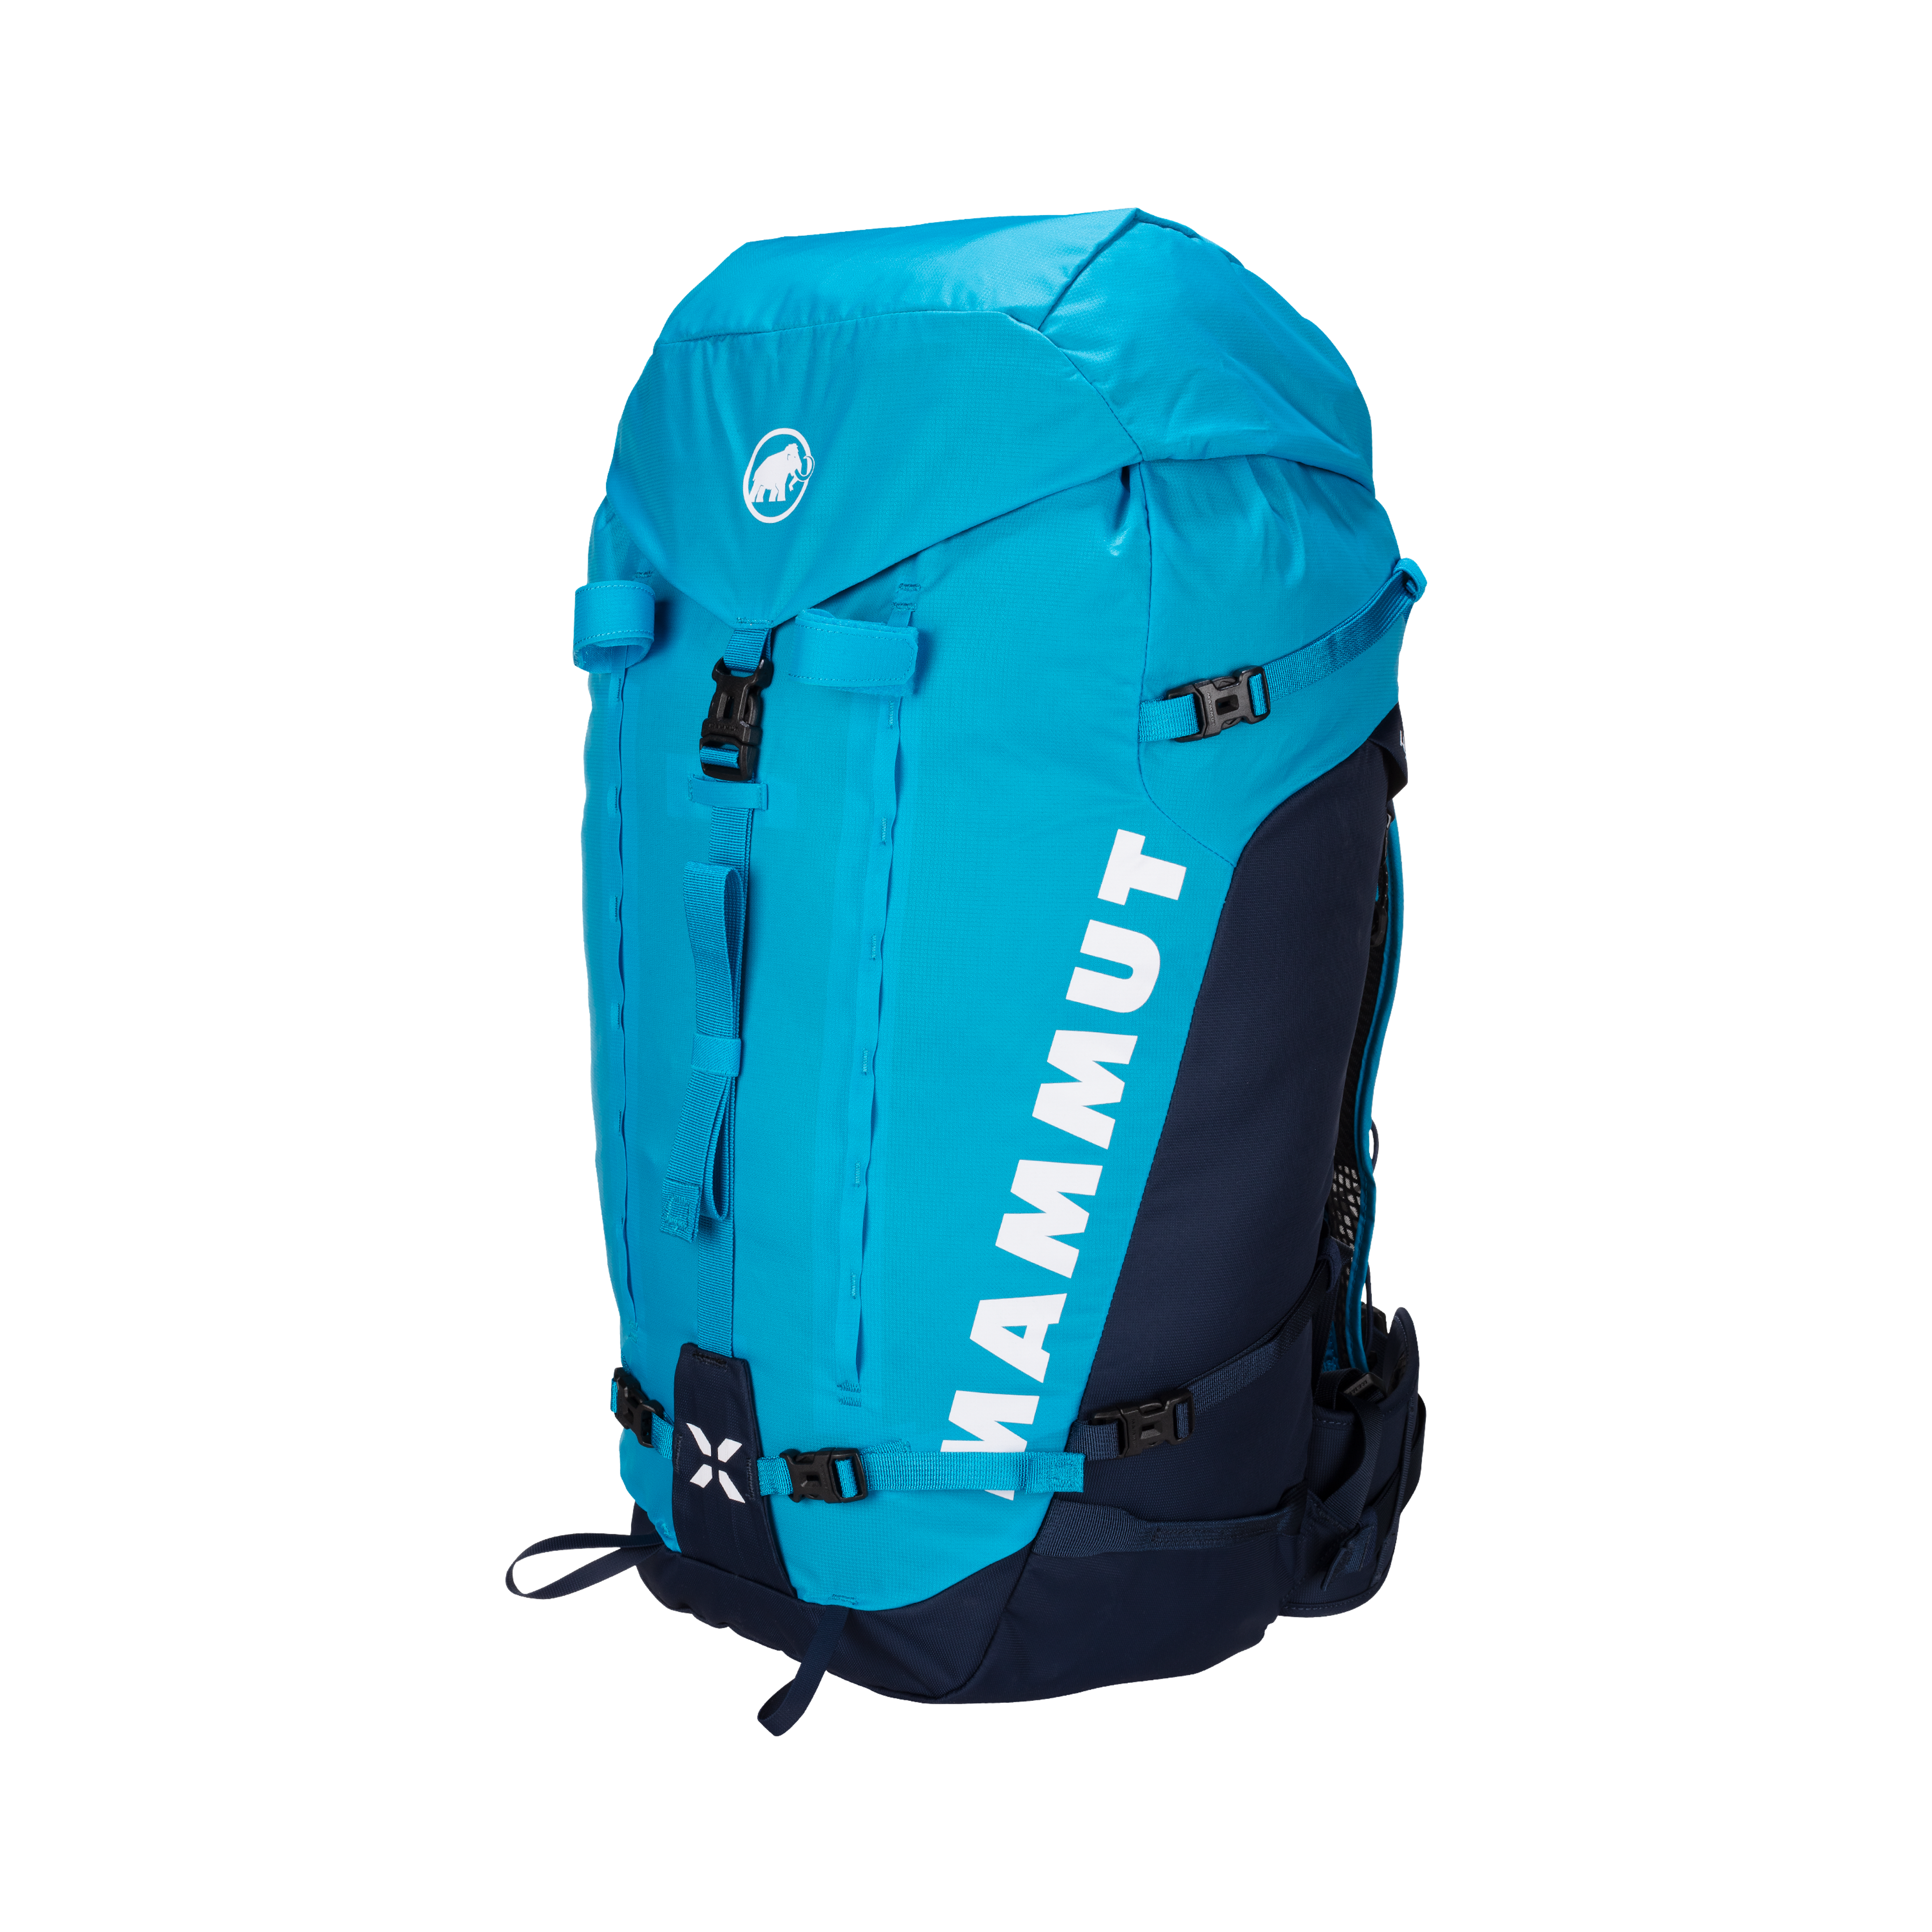 Mammut LMNT Rope Bag  Outdoor stores, sports, cycling, skiing